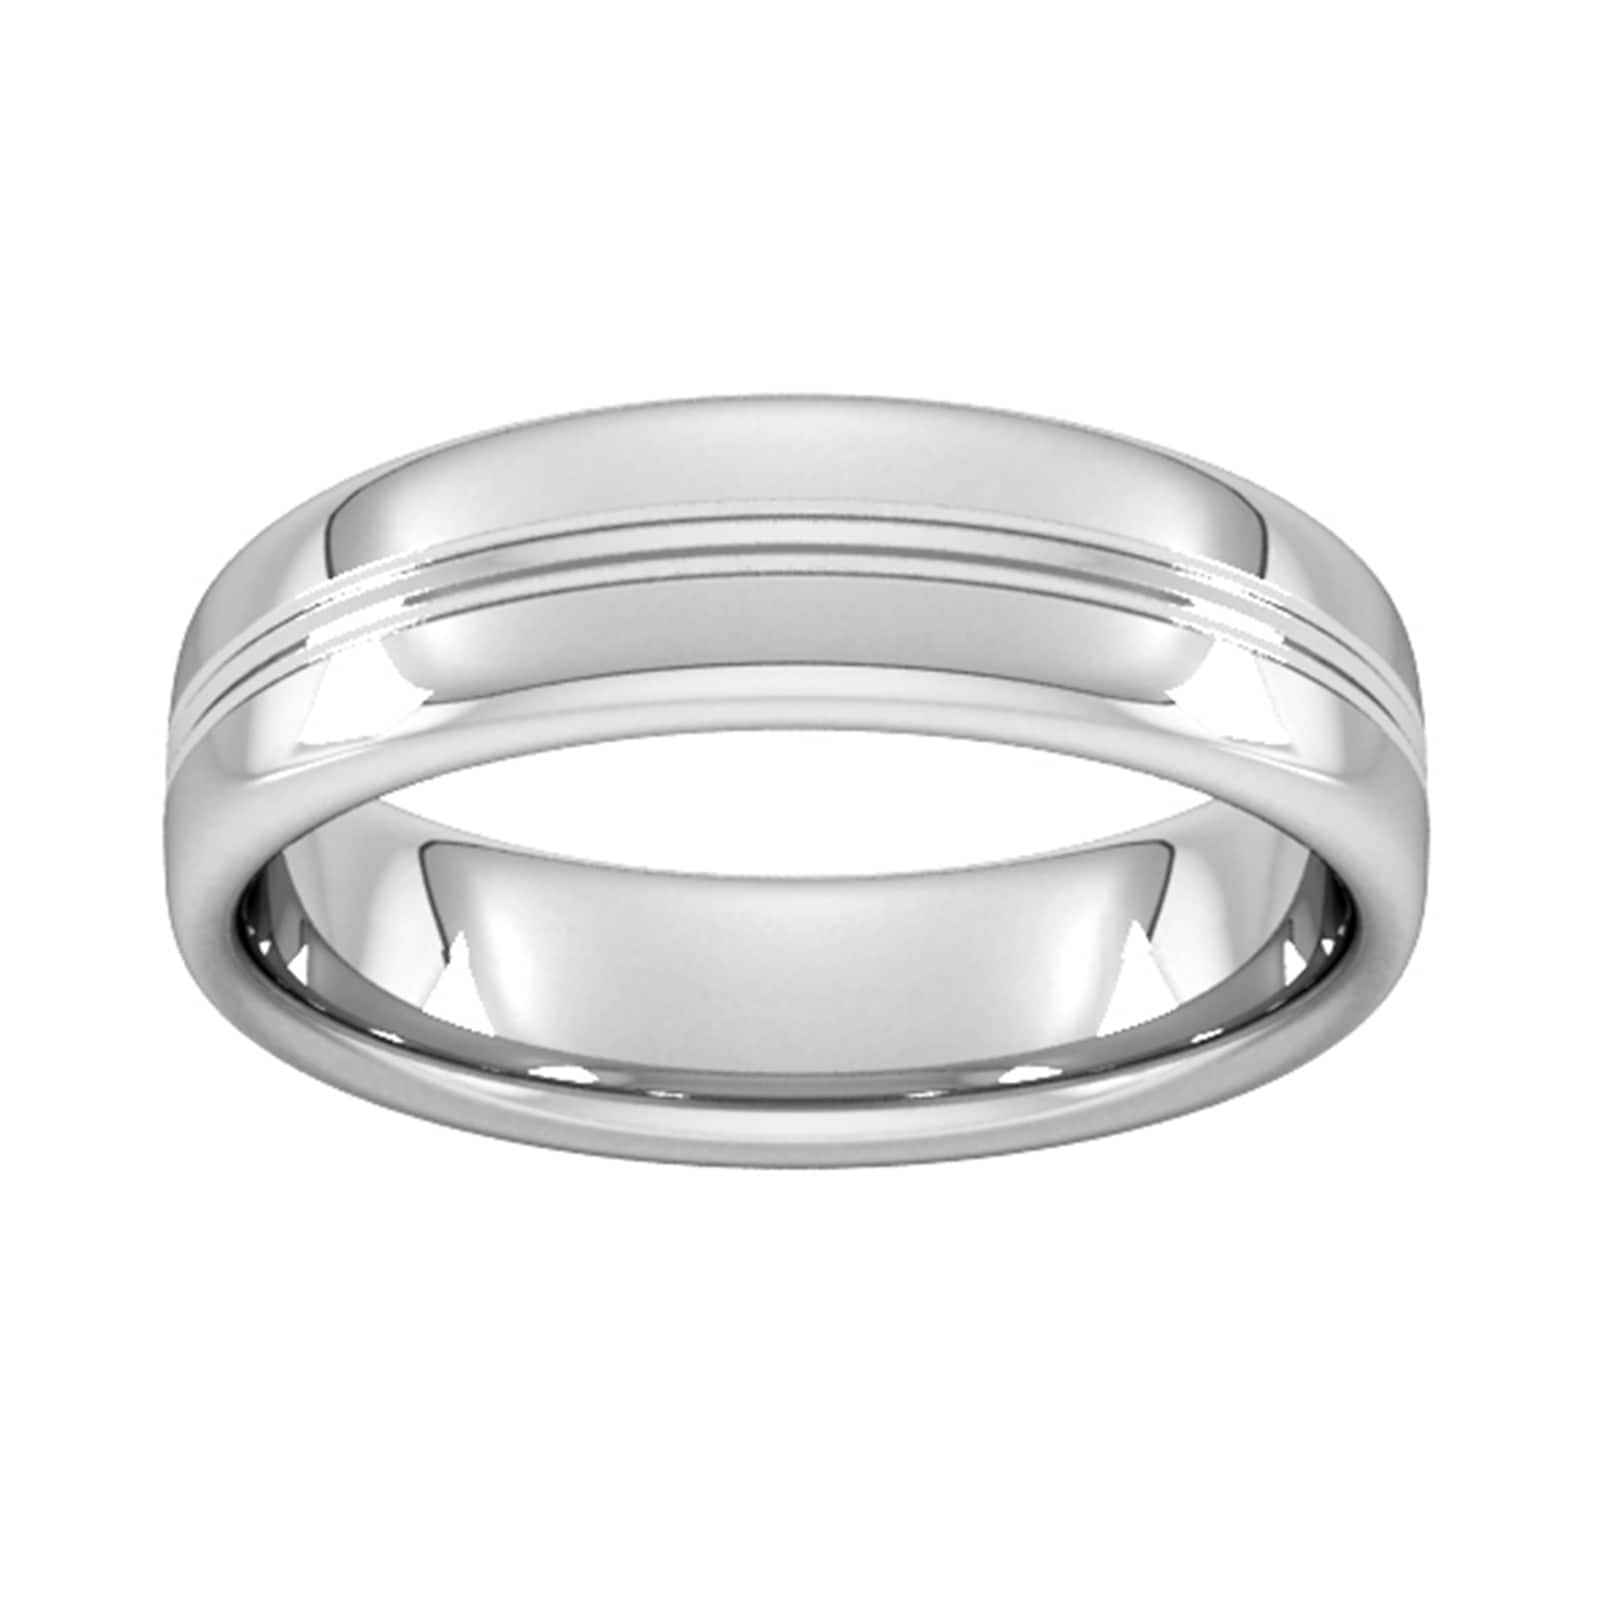 6mm Slight Court Heavy Grooved Polished Finish Wedding Ring In 950 Palladium - Ring Size Q